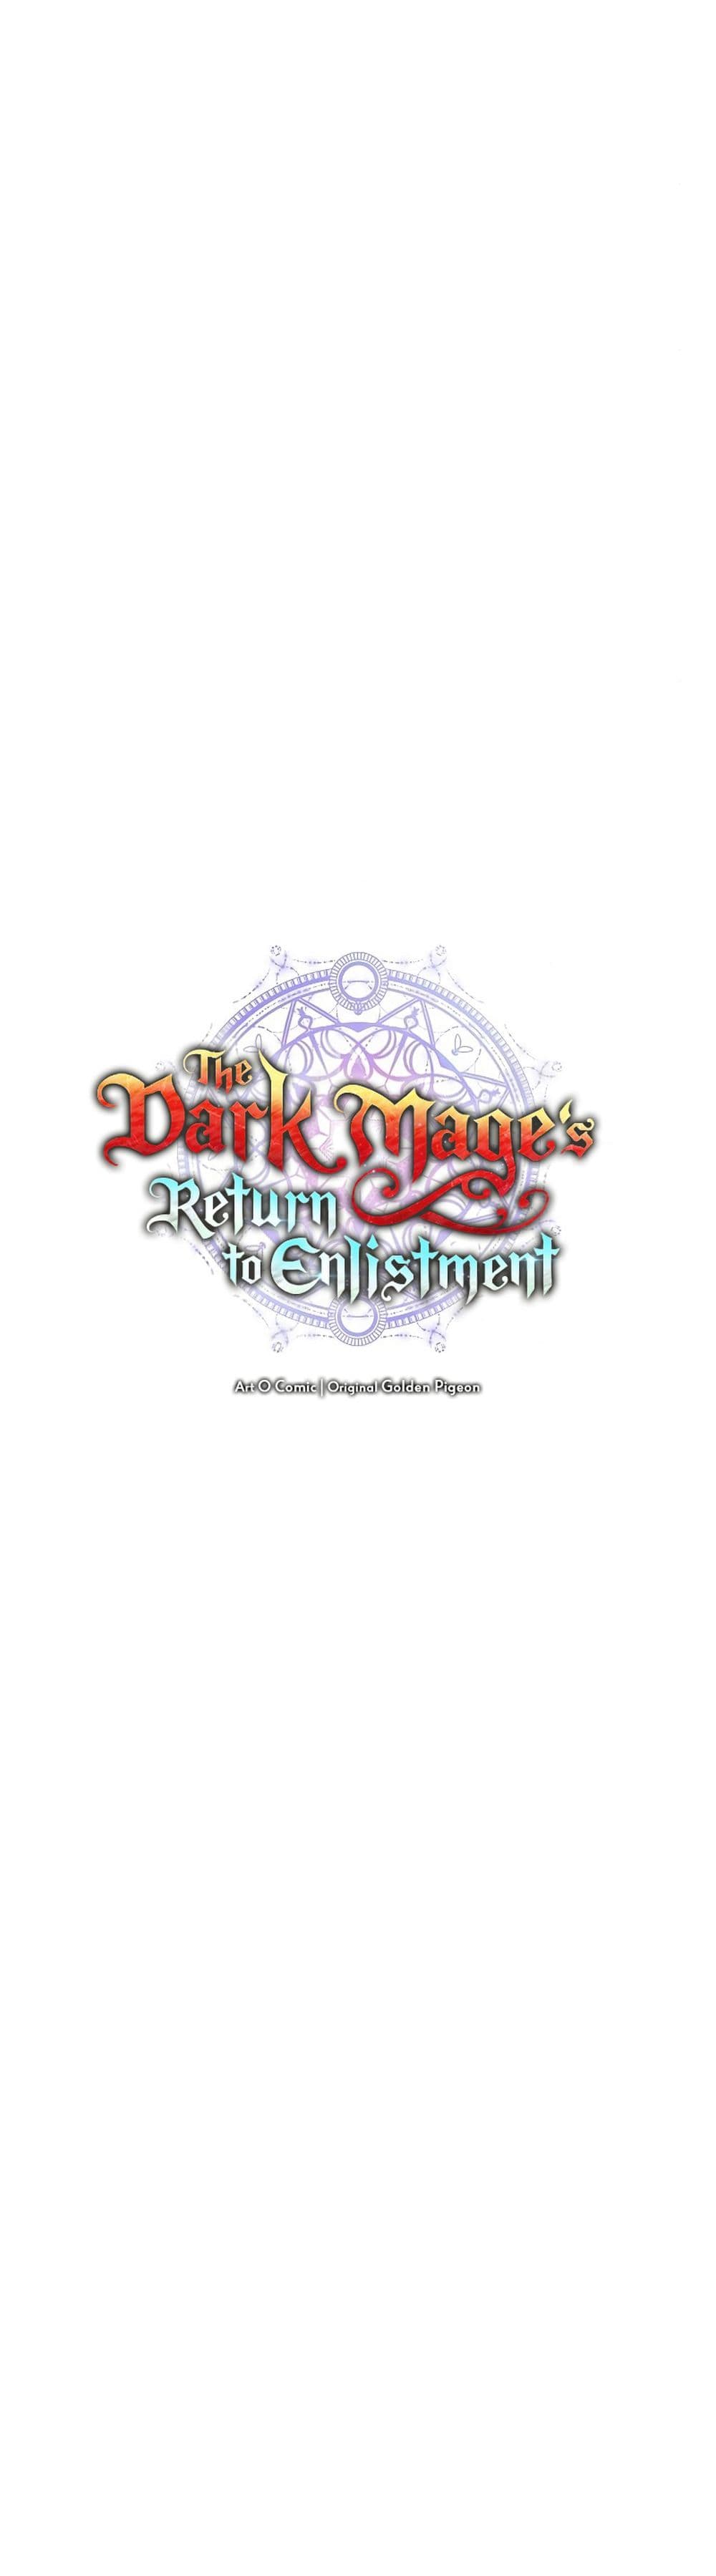 The Dark Mage’s Return to Enlistment 37-37